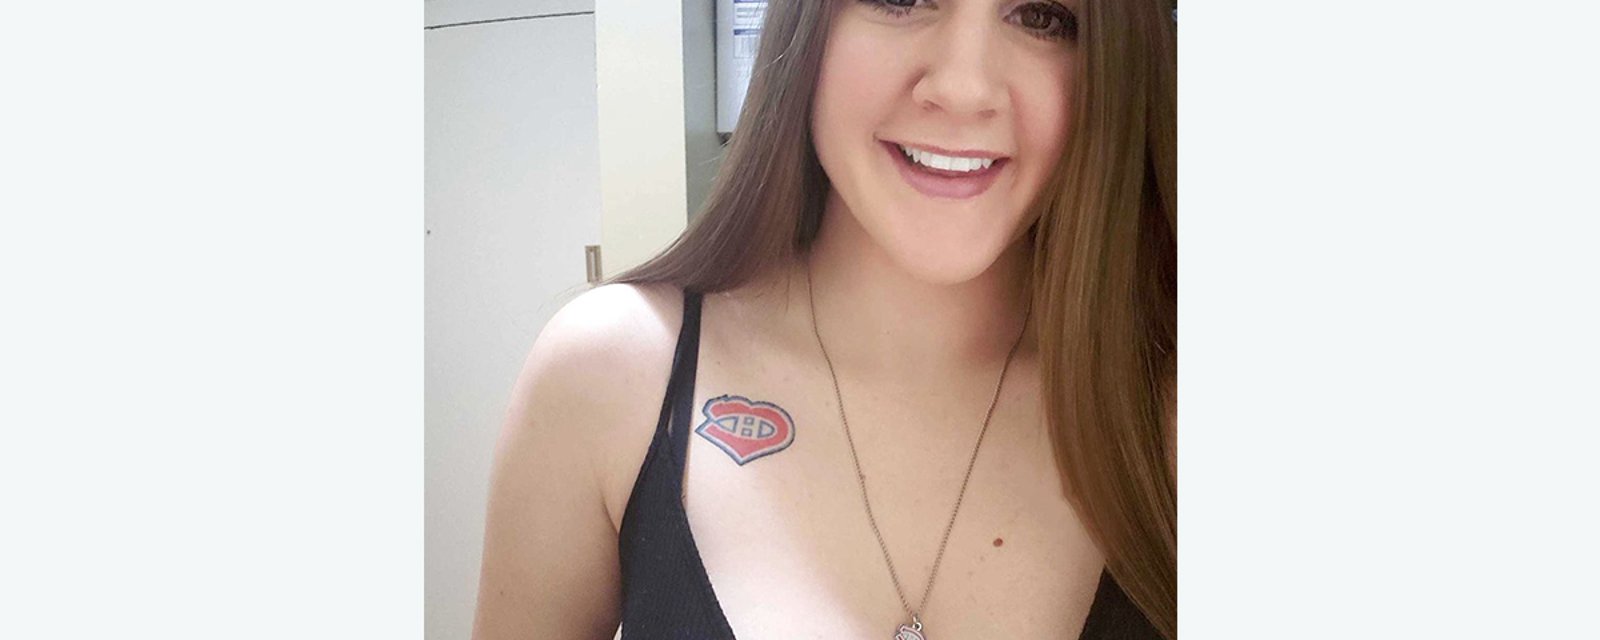 Habs fan promises to get a Leafs tattoo if her #BellLetsTalk tweet reaches 200,000 shares